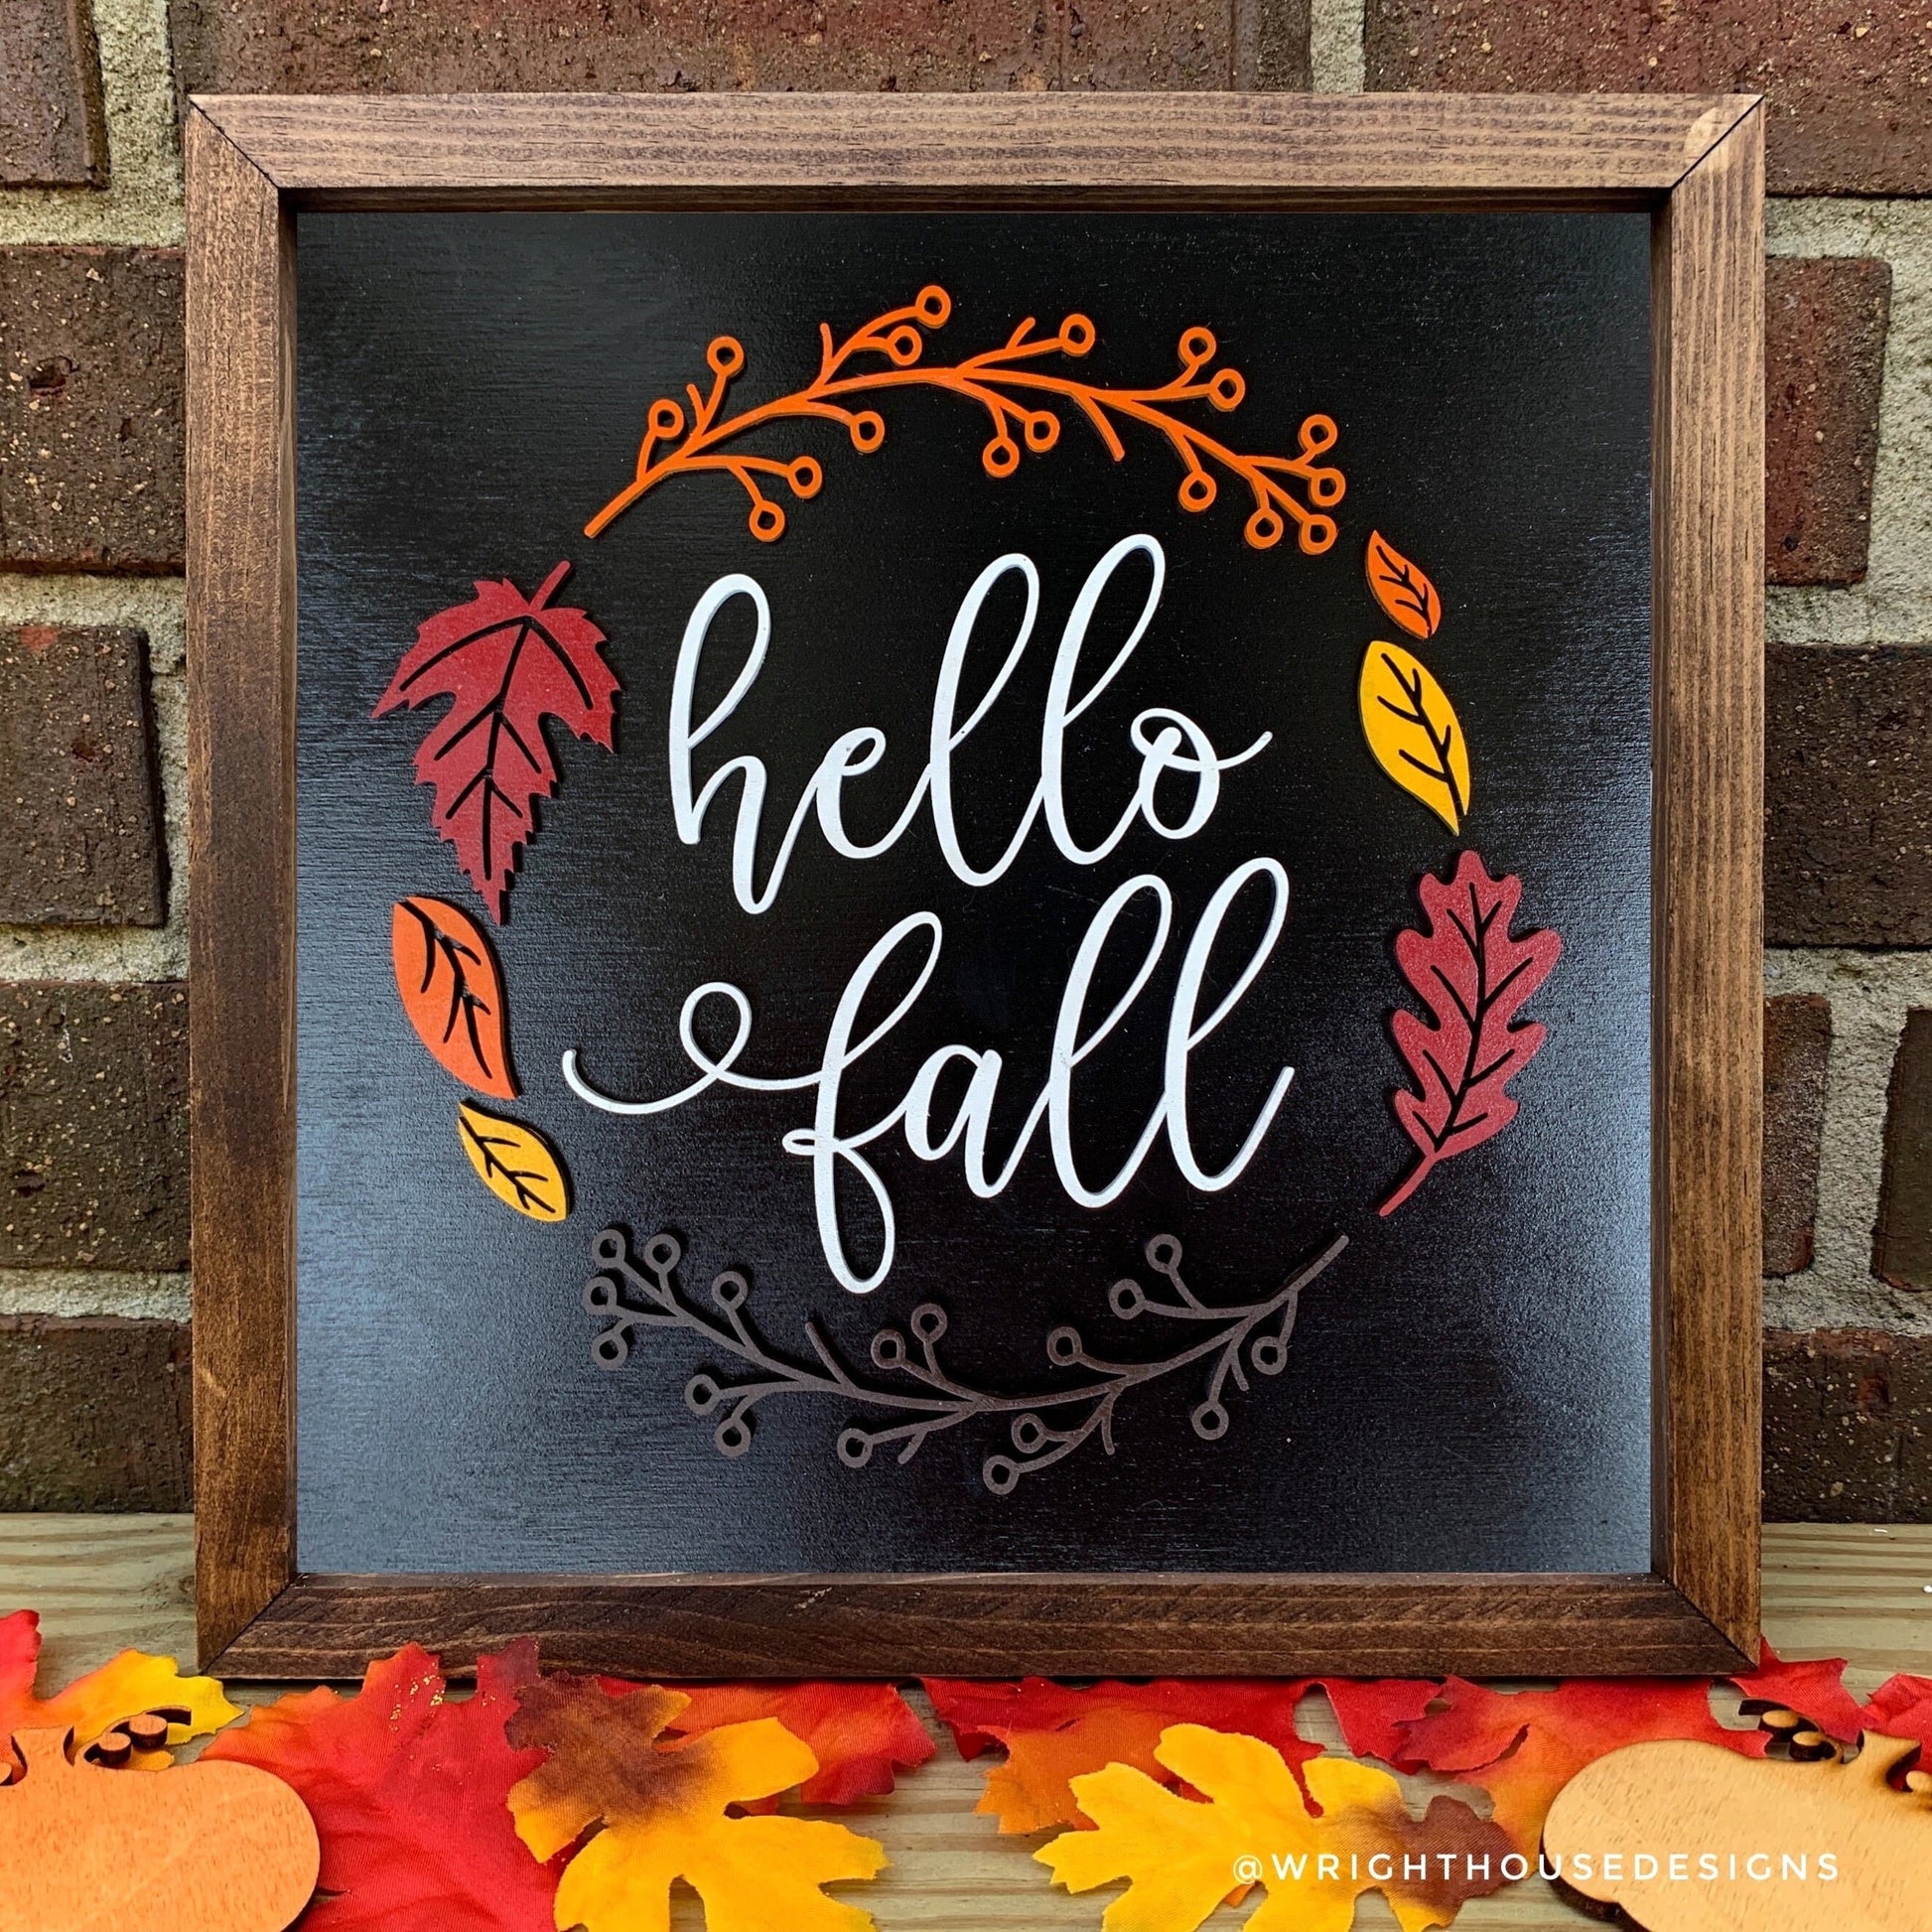 Hello Fall - Wooden Coffee Bar Sign - Autumn Cottagecore Home and Kitchen Decor - Console Table Decor - Seasonal Foliage Framed Wall Art